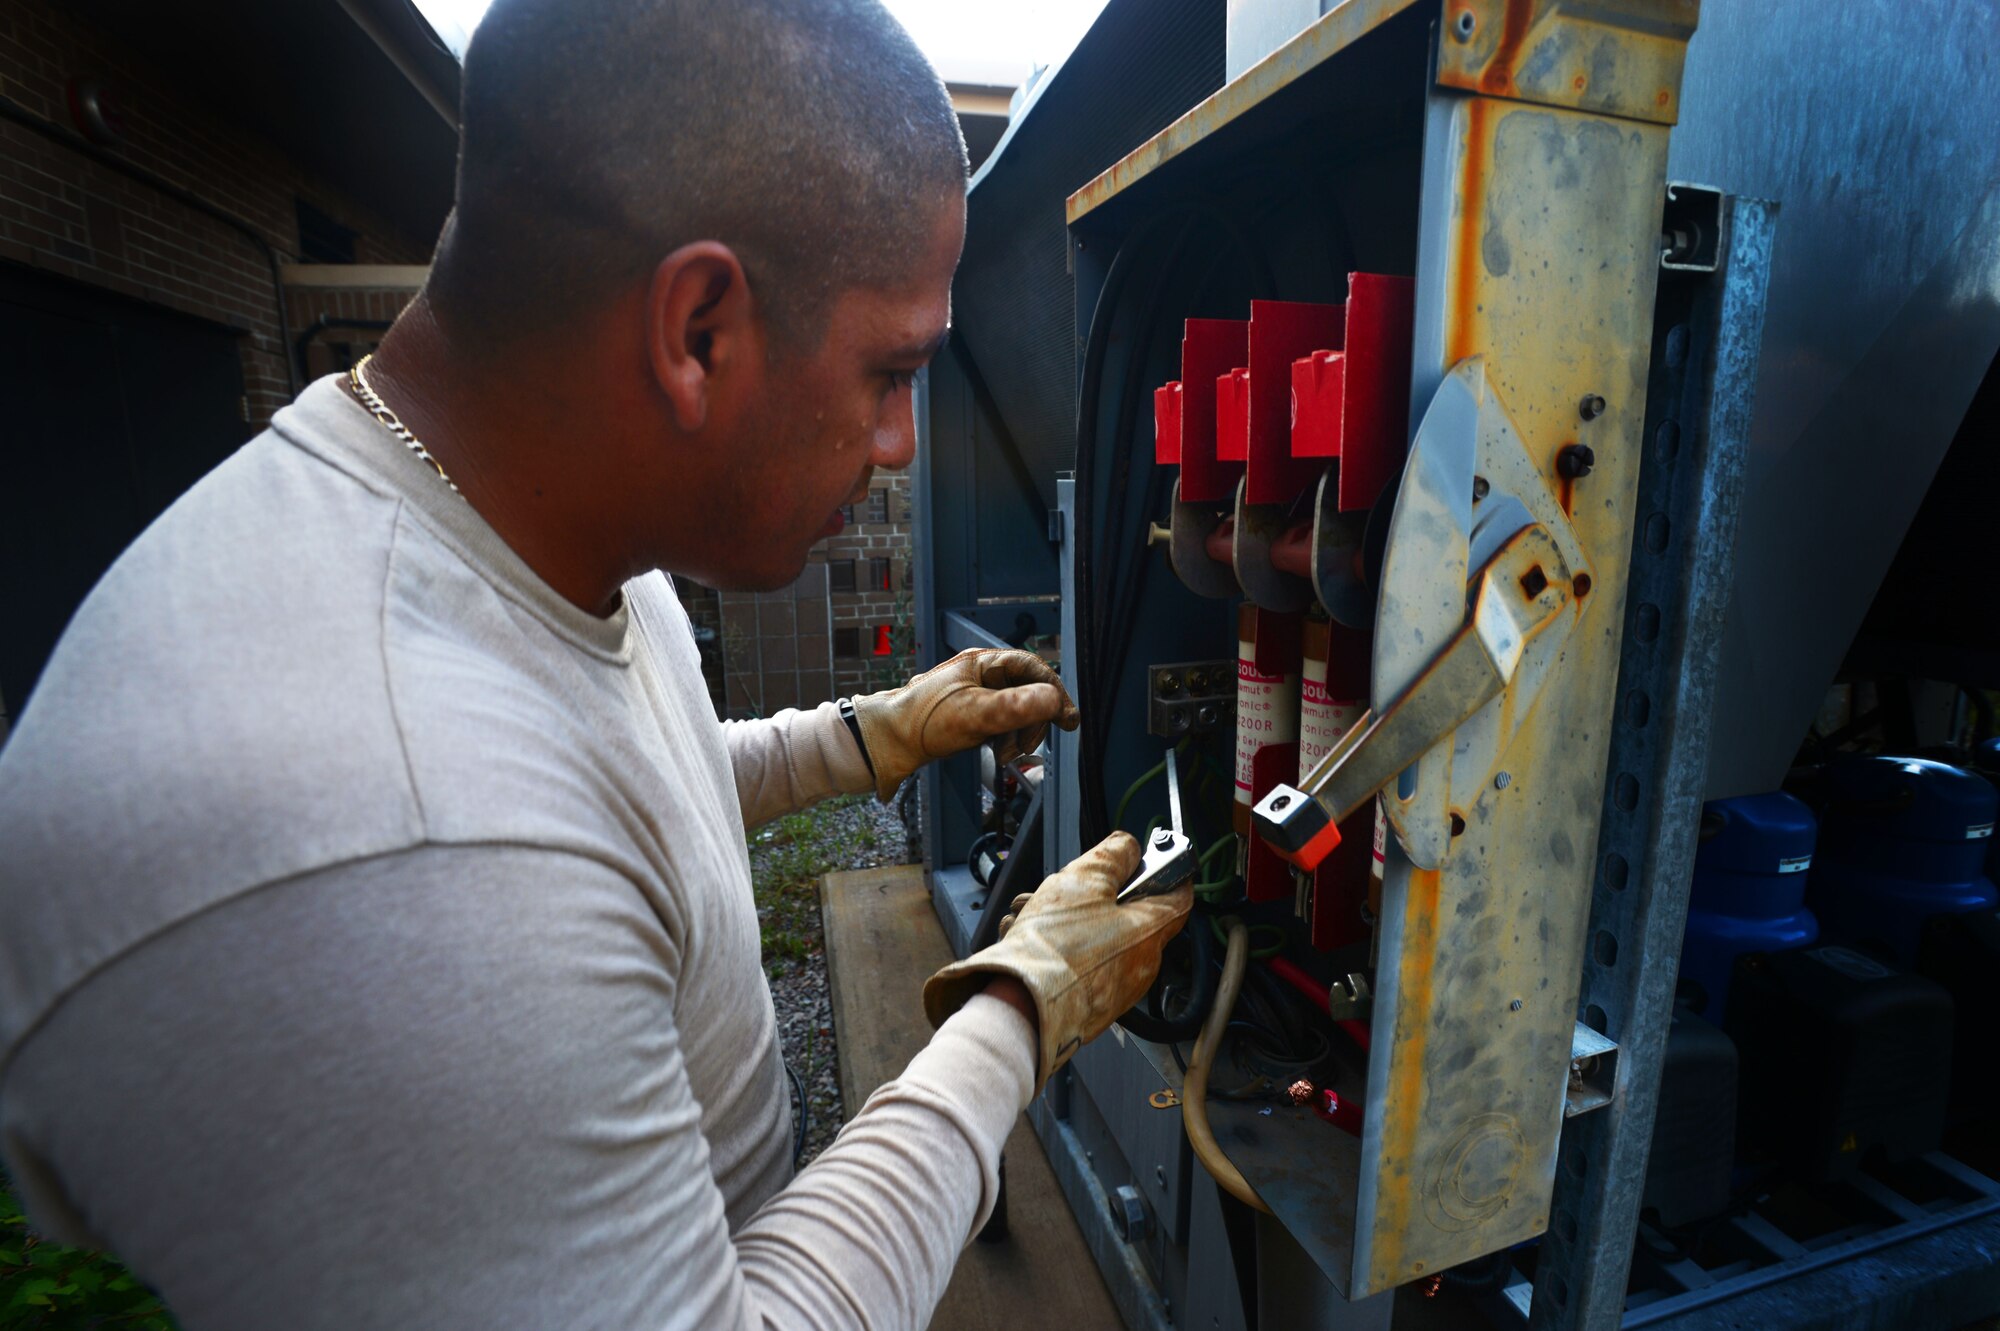 U.S. Air Force Staff Sgt. Carlos Morales, 20th Civil Engineer Squadron electrical systems craftsman, prepares a electrical box for removal at Shaw Air Force Base, S.C., July 17, 2014. Morales, along with several 20th CES electrical systems Airmen, installed a new electrical box to an existing power supply in preparation for an new air conditioning unit. (U.S. Air Force photo by Airman 1st Class Jensen Stidham/Released)